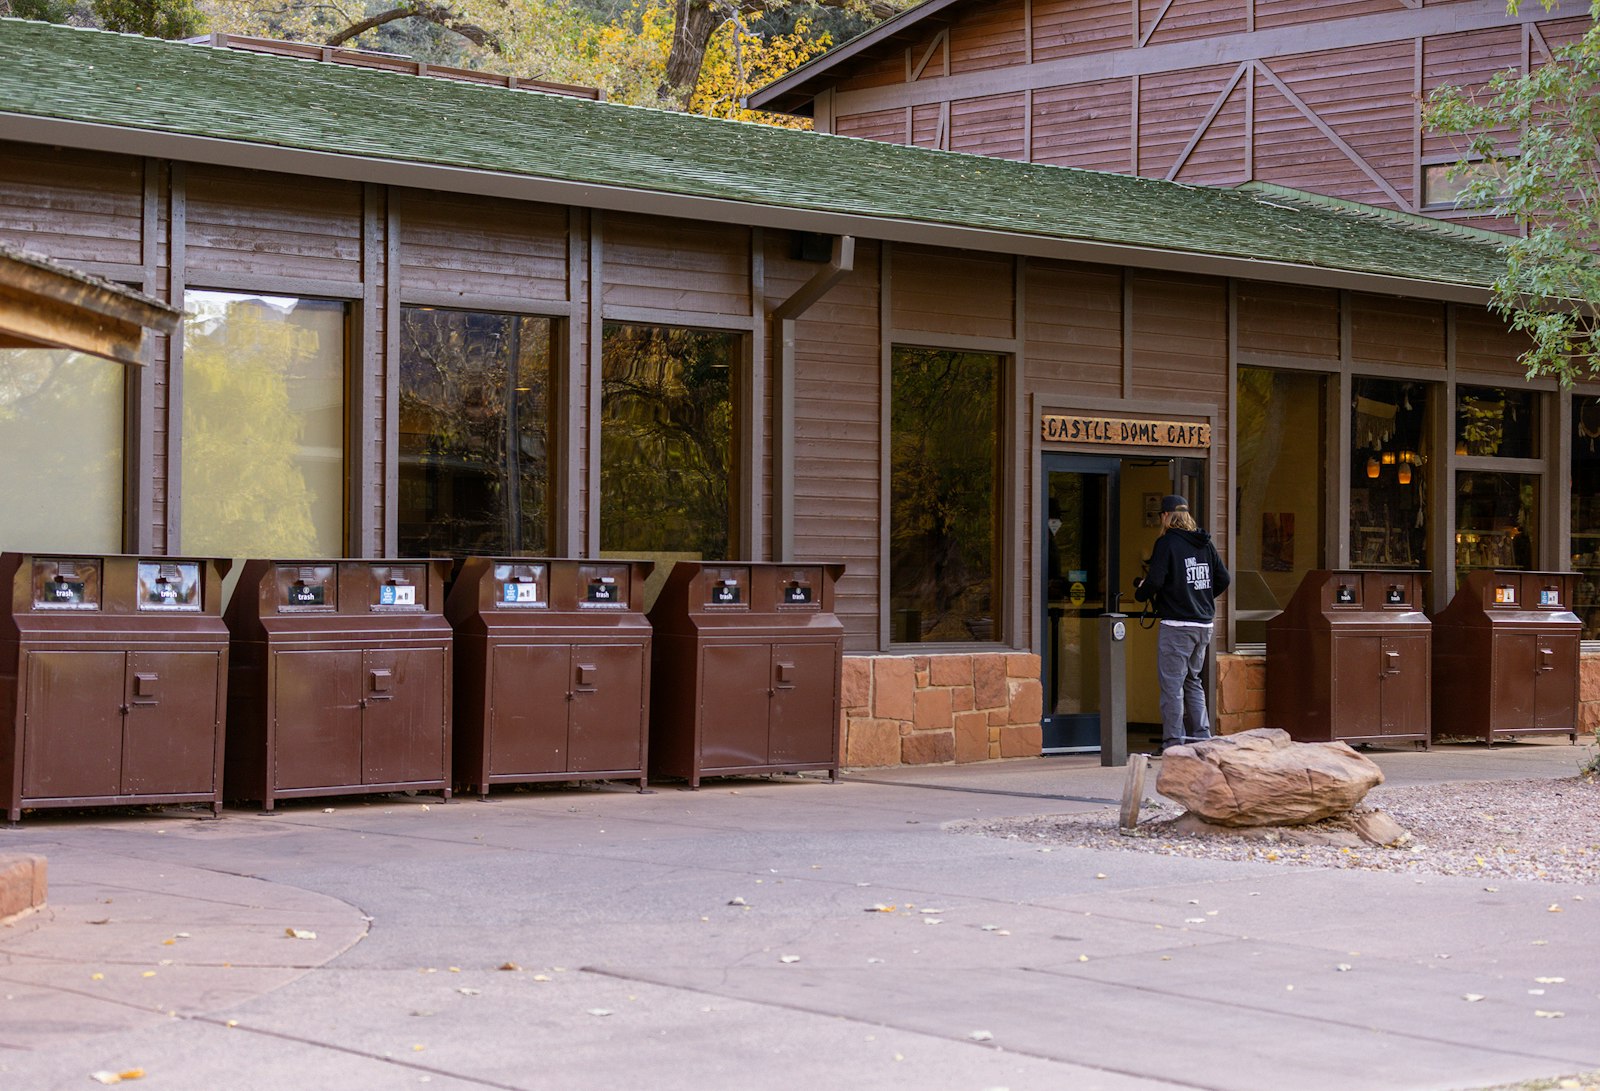 A person walks into a building, the facade of which is lined with brown recycling bins